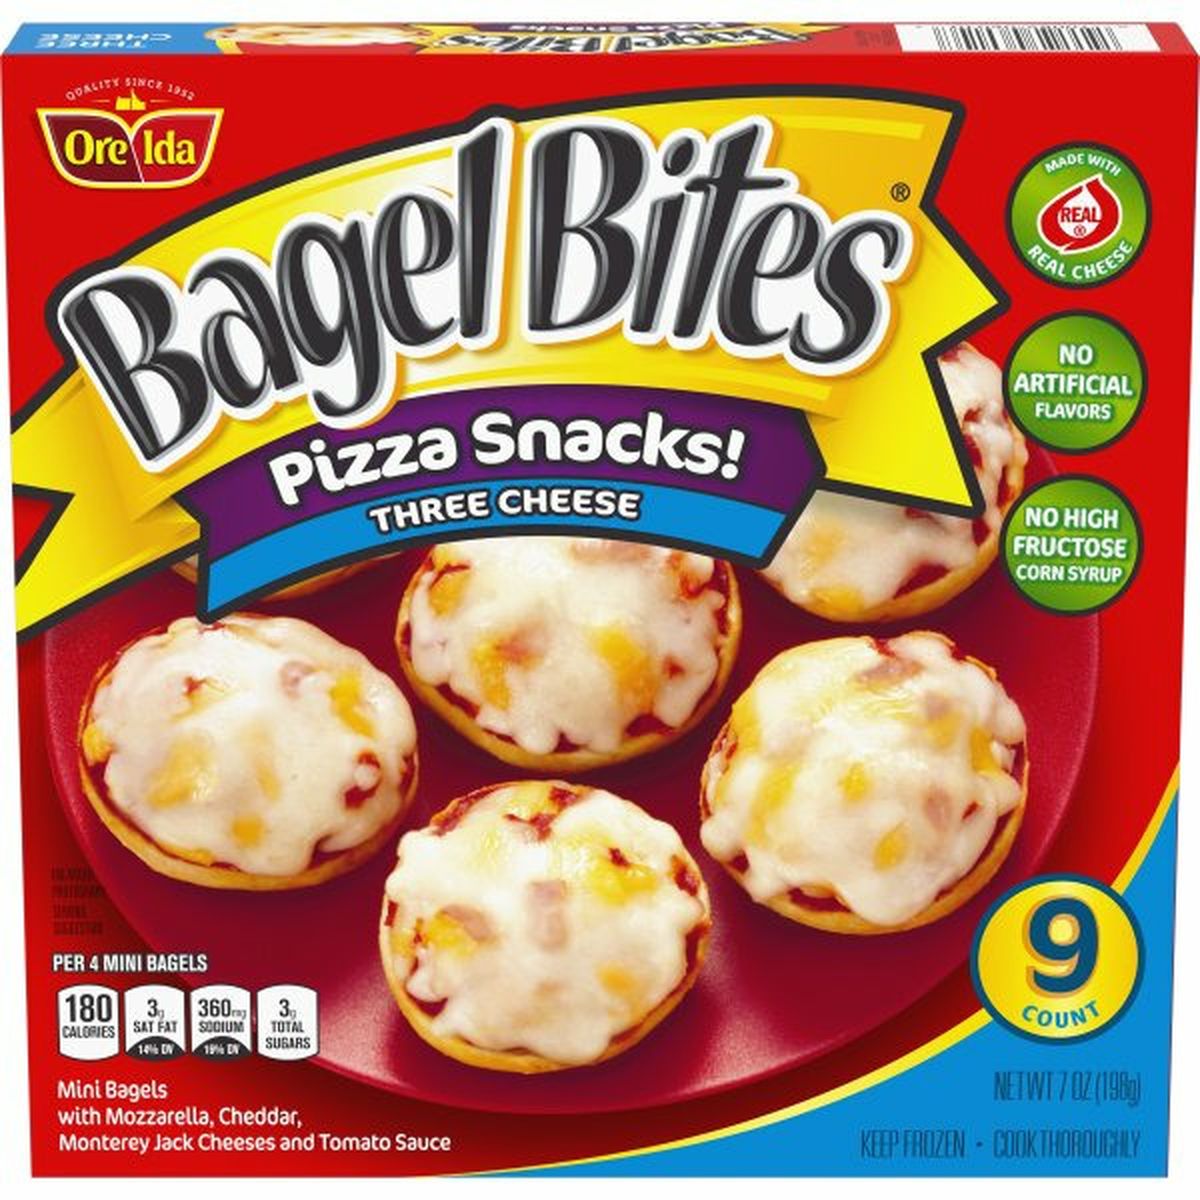 Calories in Bagel Bites Three Cheese Pizza Snacks